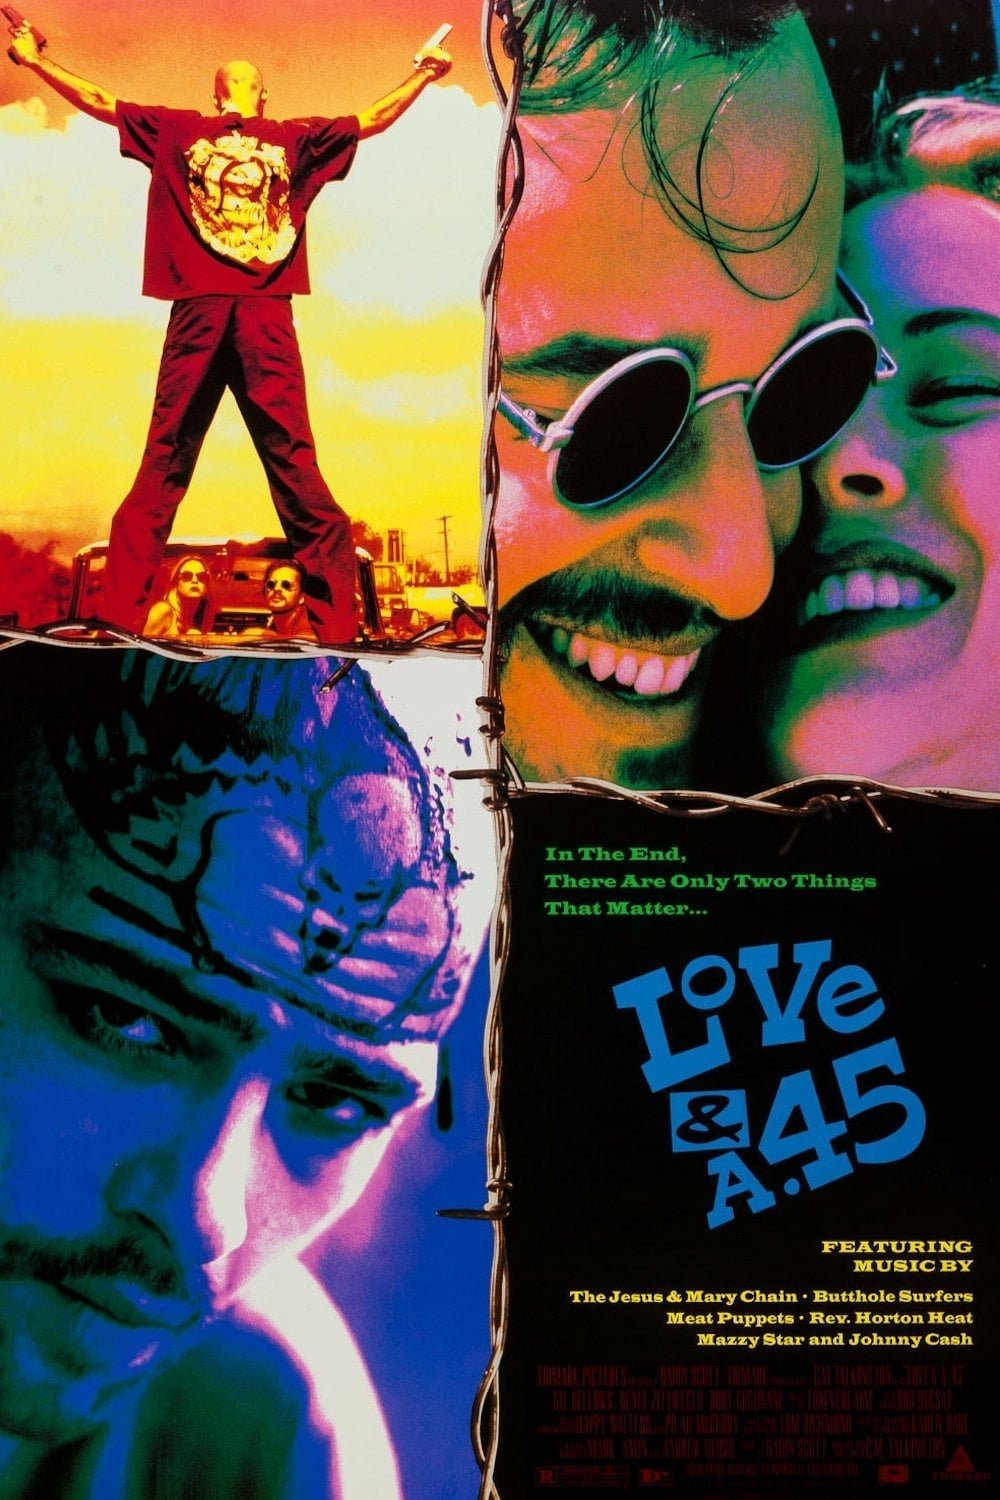 Poster of the movie Love and a .45